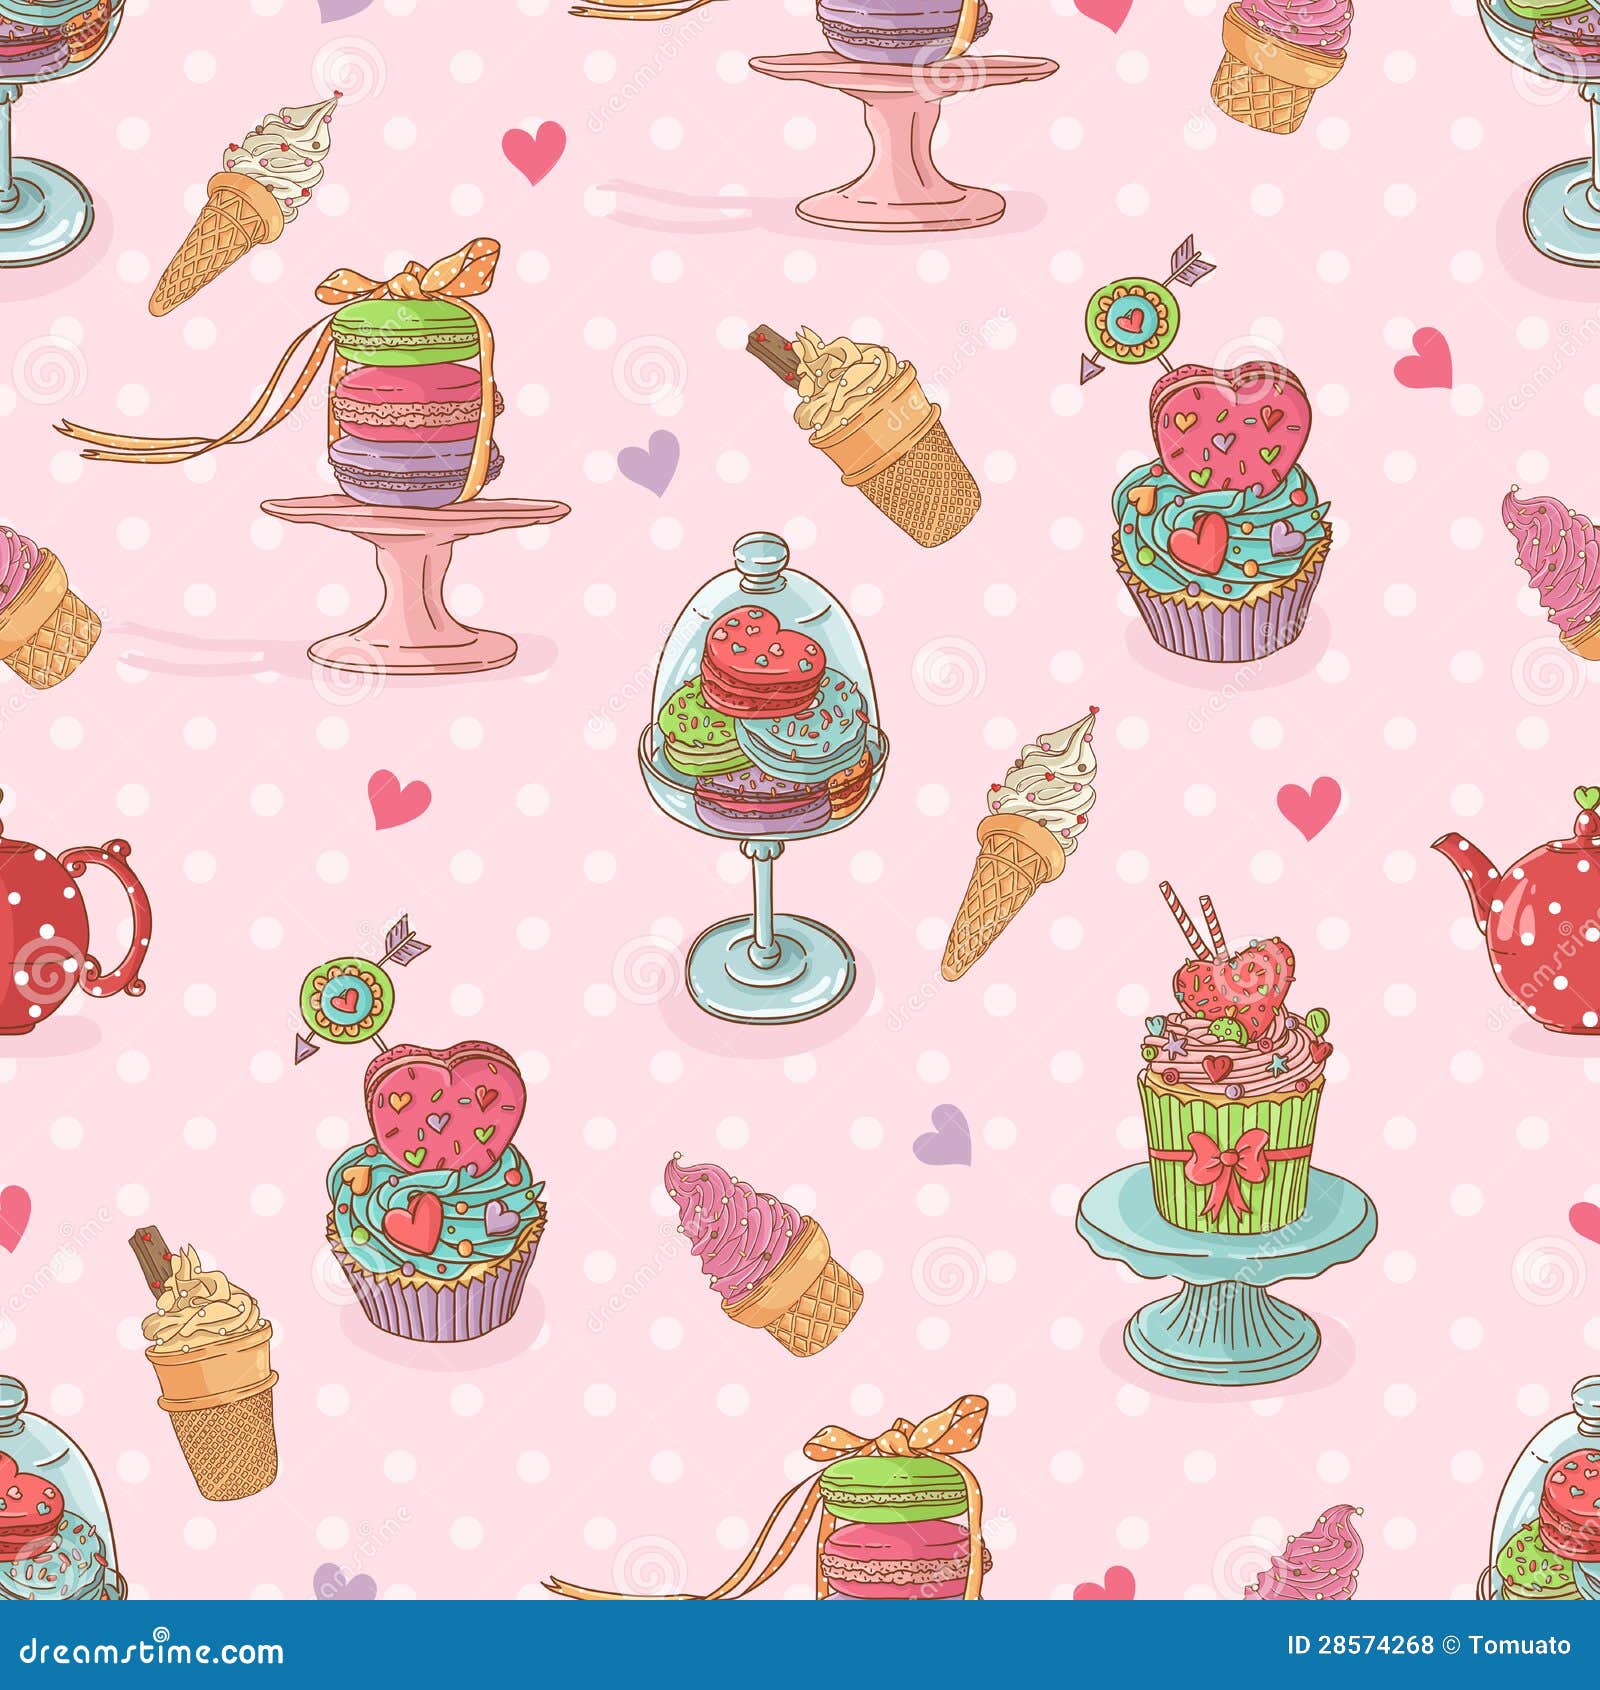 only tumblr backgrounds girly Royalty Pattern Sweet And Ice Seamless Cream Cupcakes With